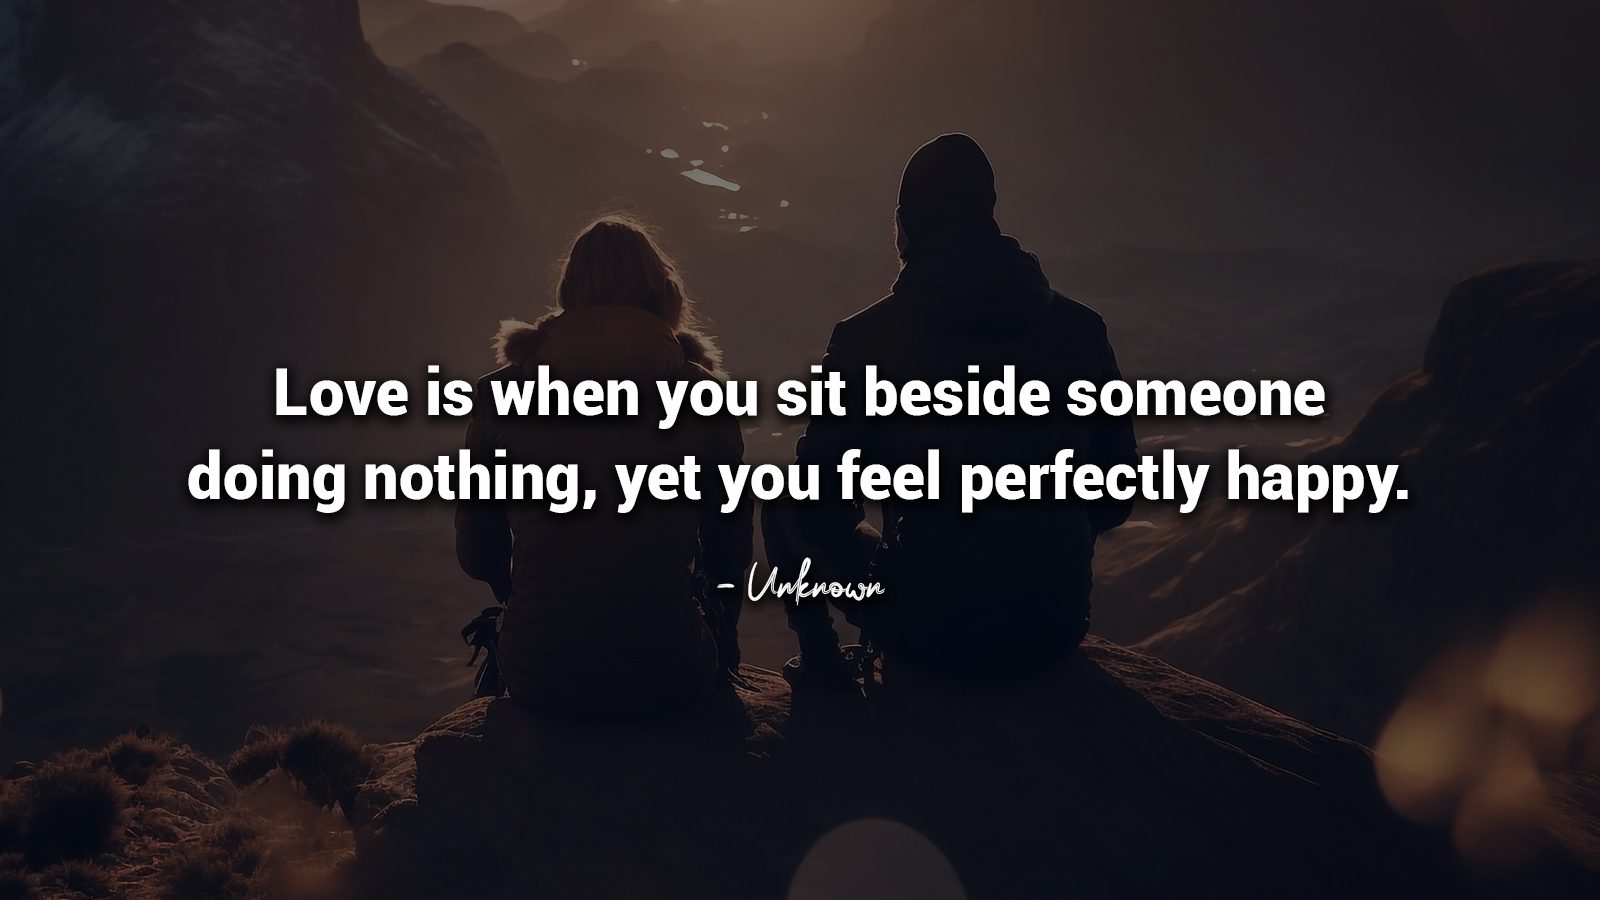 20 Best Love Quotes for Every Couple